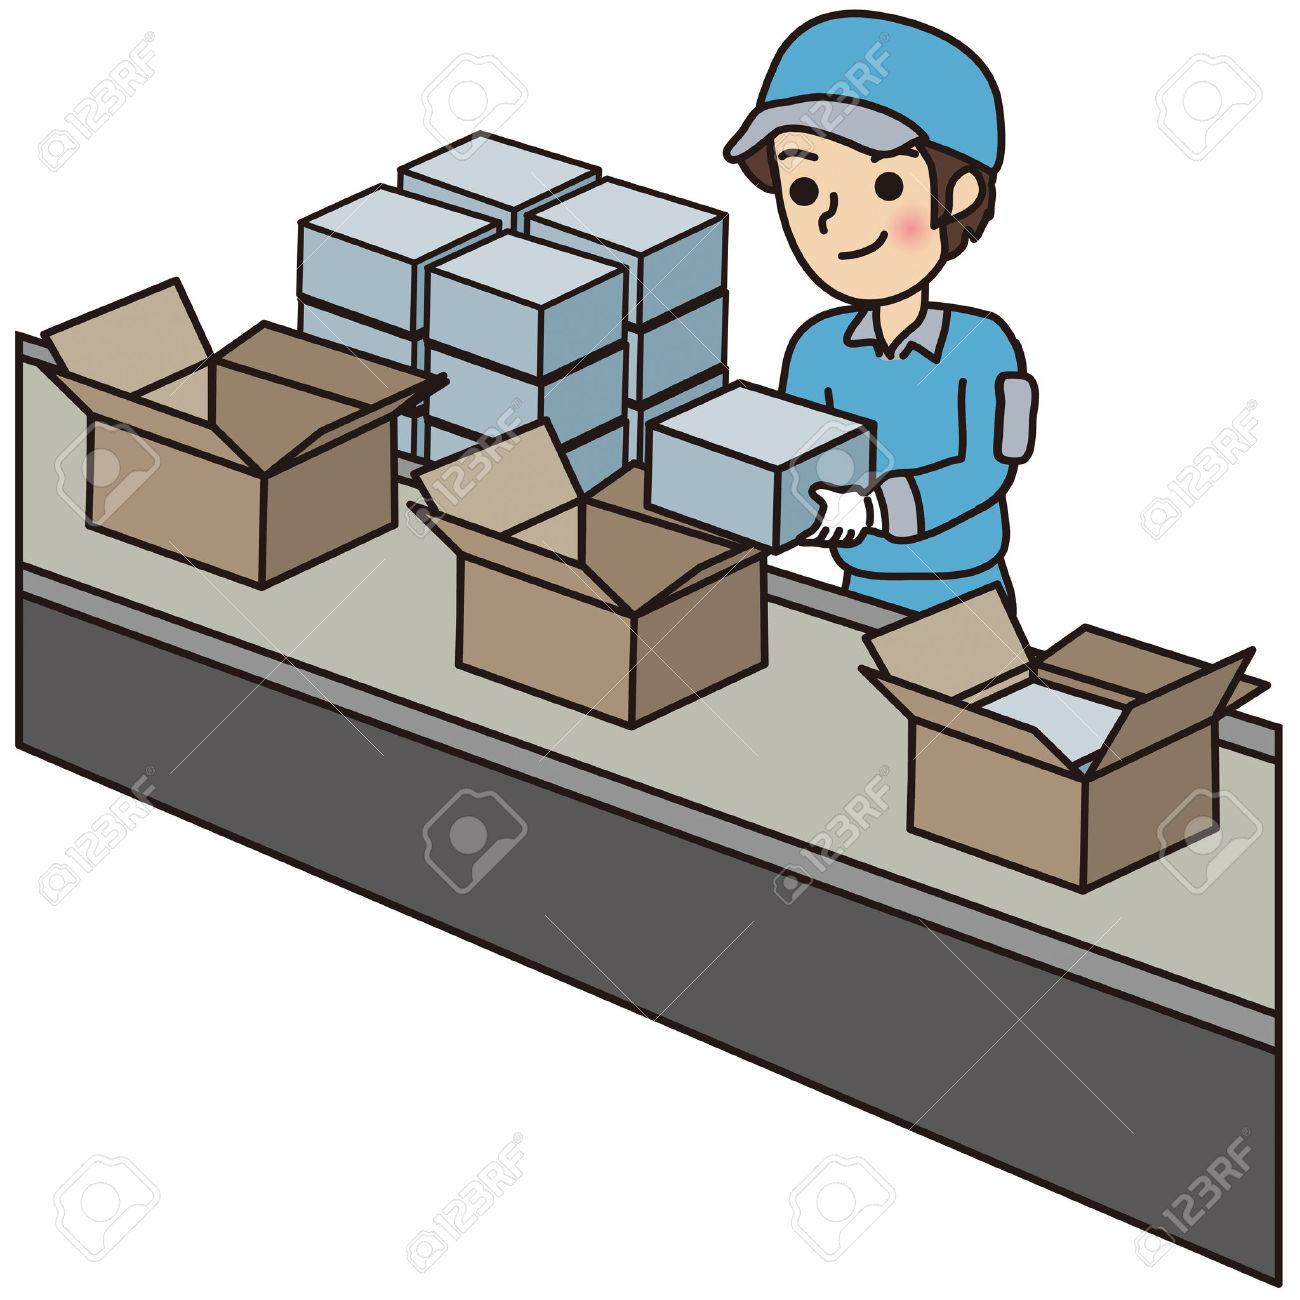 Packing clipart - Clipground